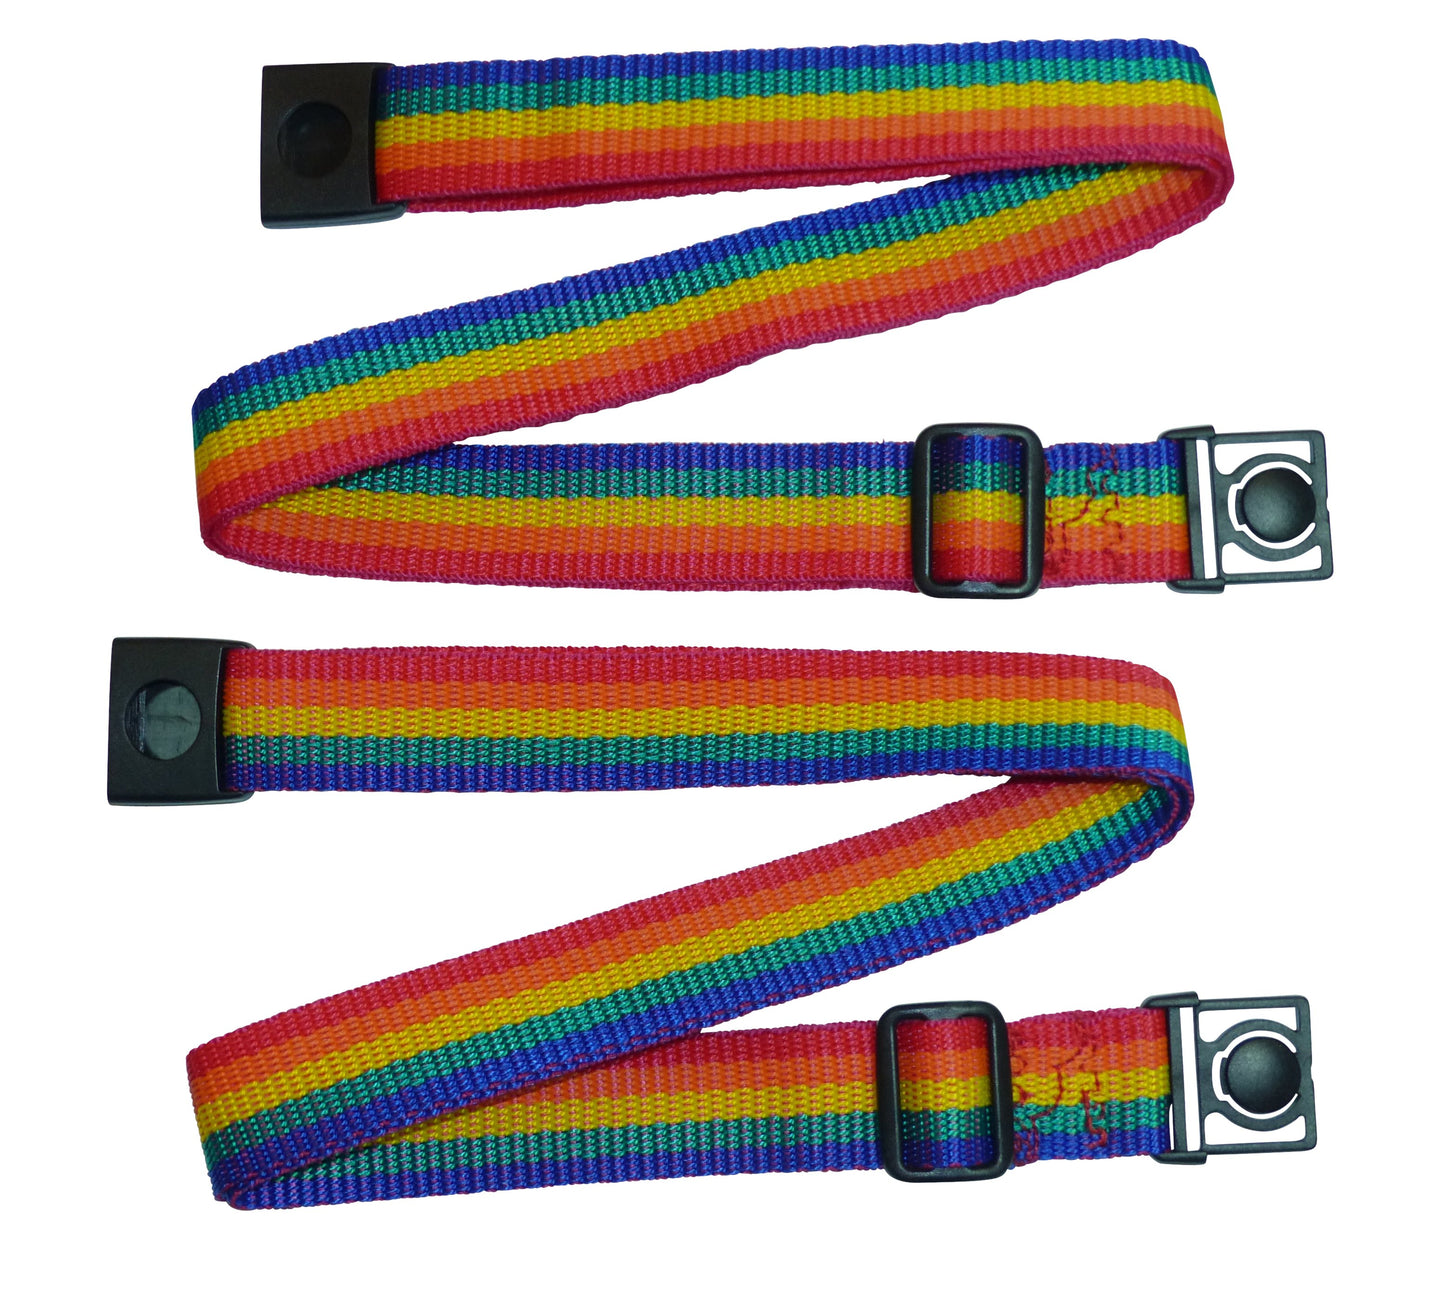 Benristraps 25mm Webbing Strap with Button Release and Triglide Slider Buckles (Pair) in Rainbow